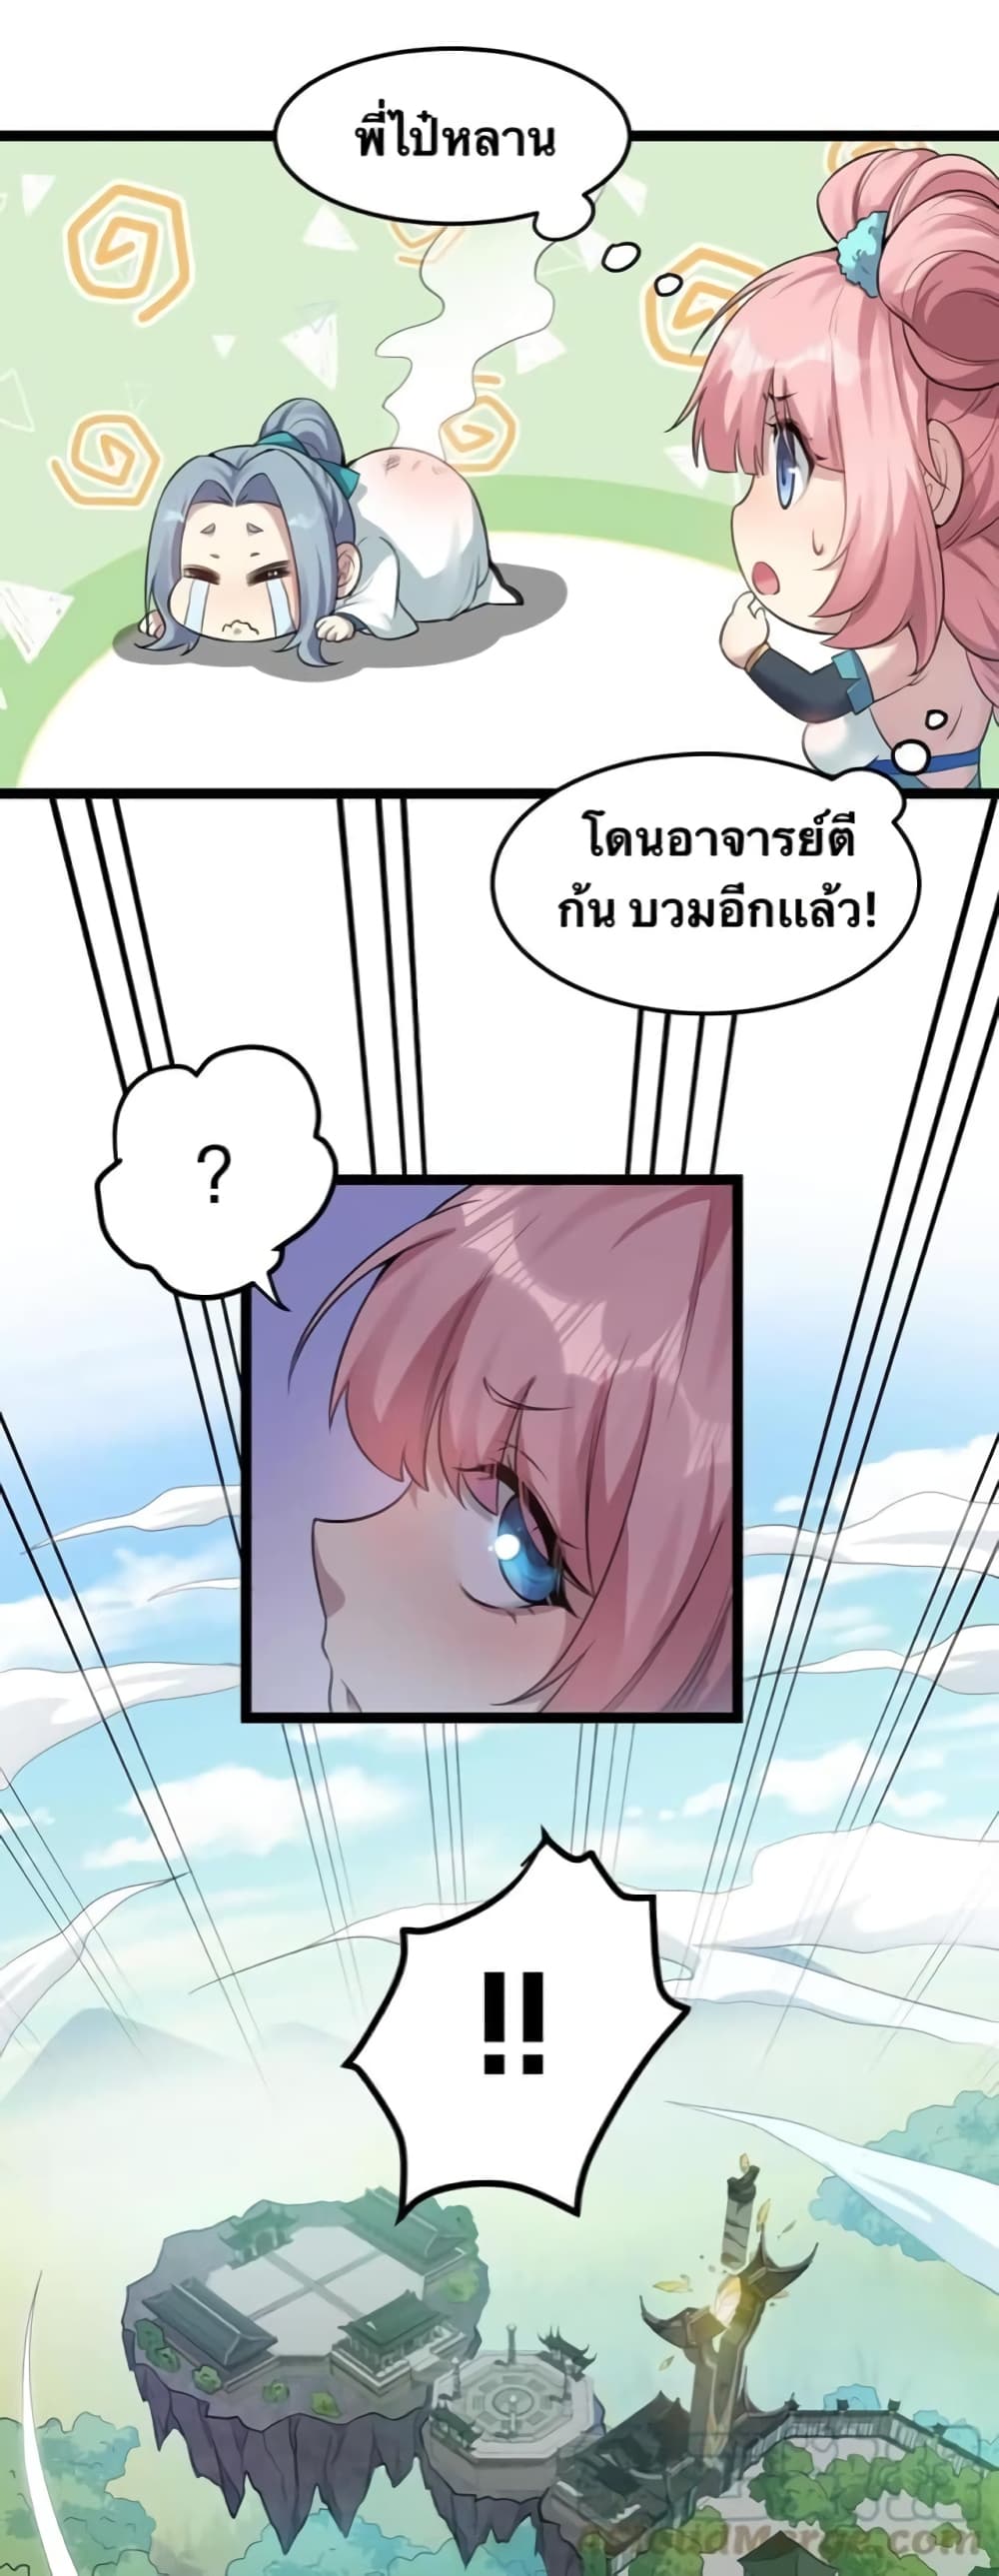 Godsian Masian from Another World ตอนที่ 93 (2)